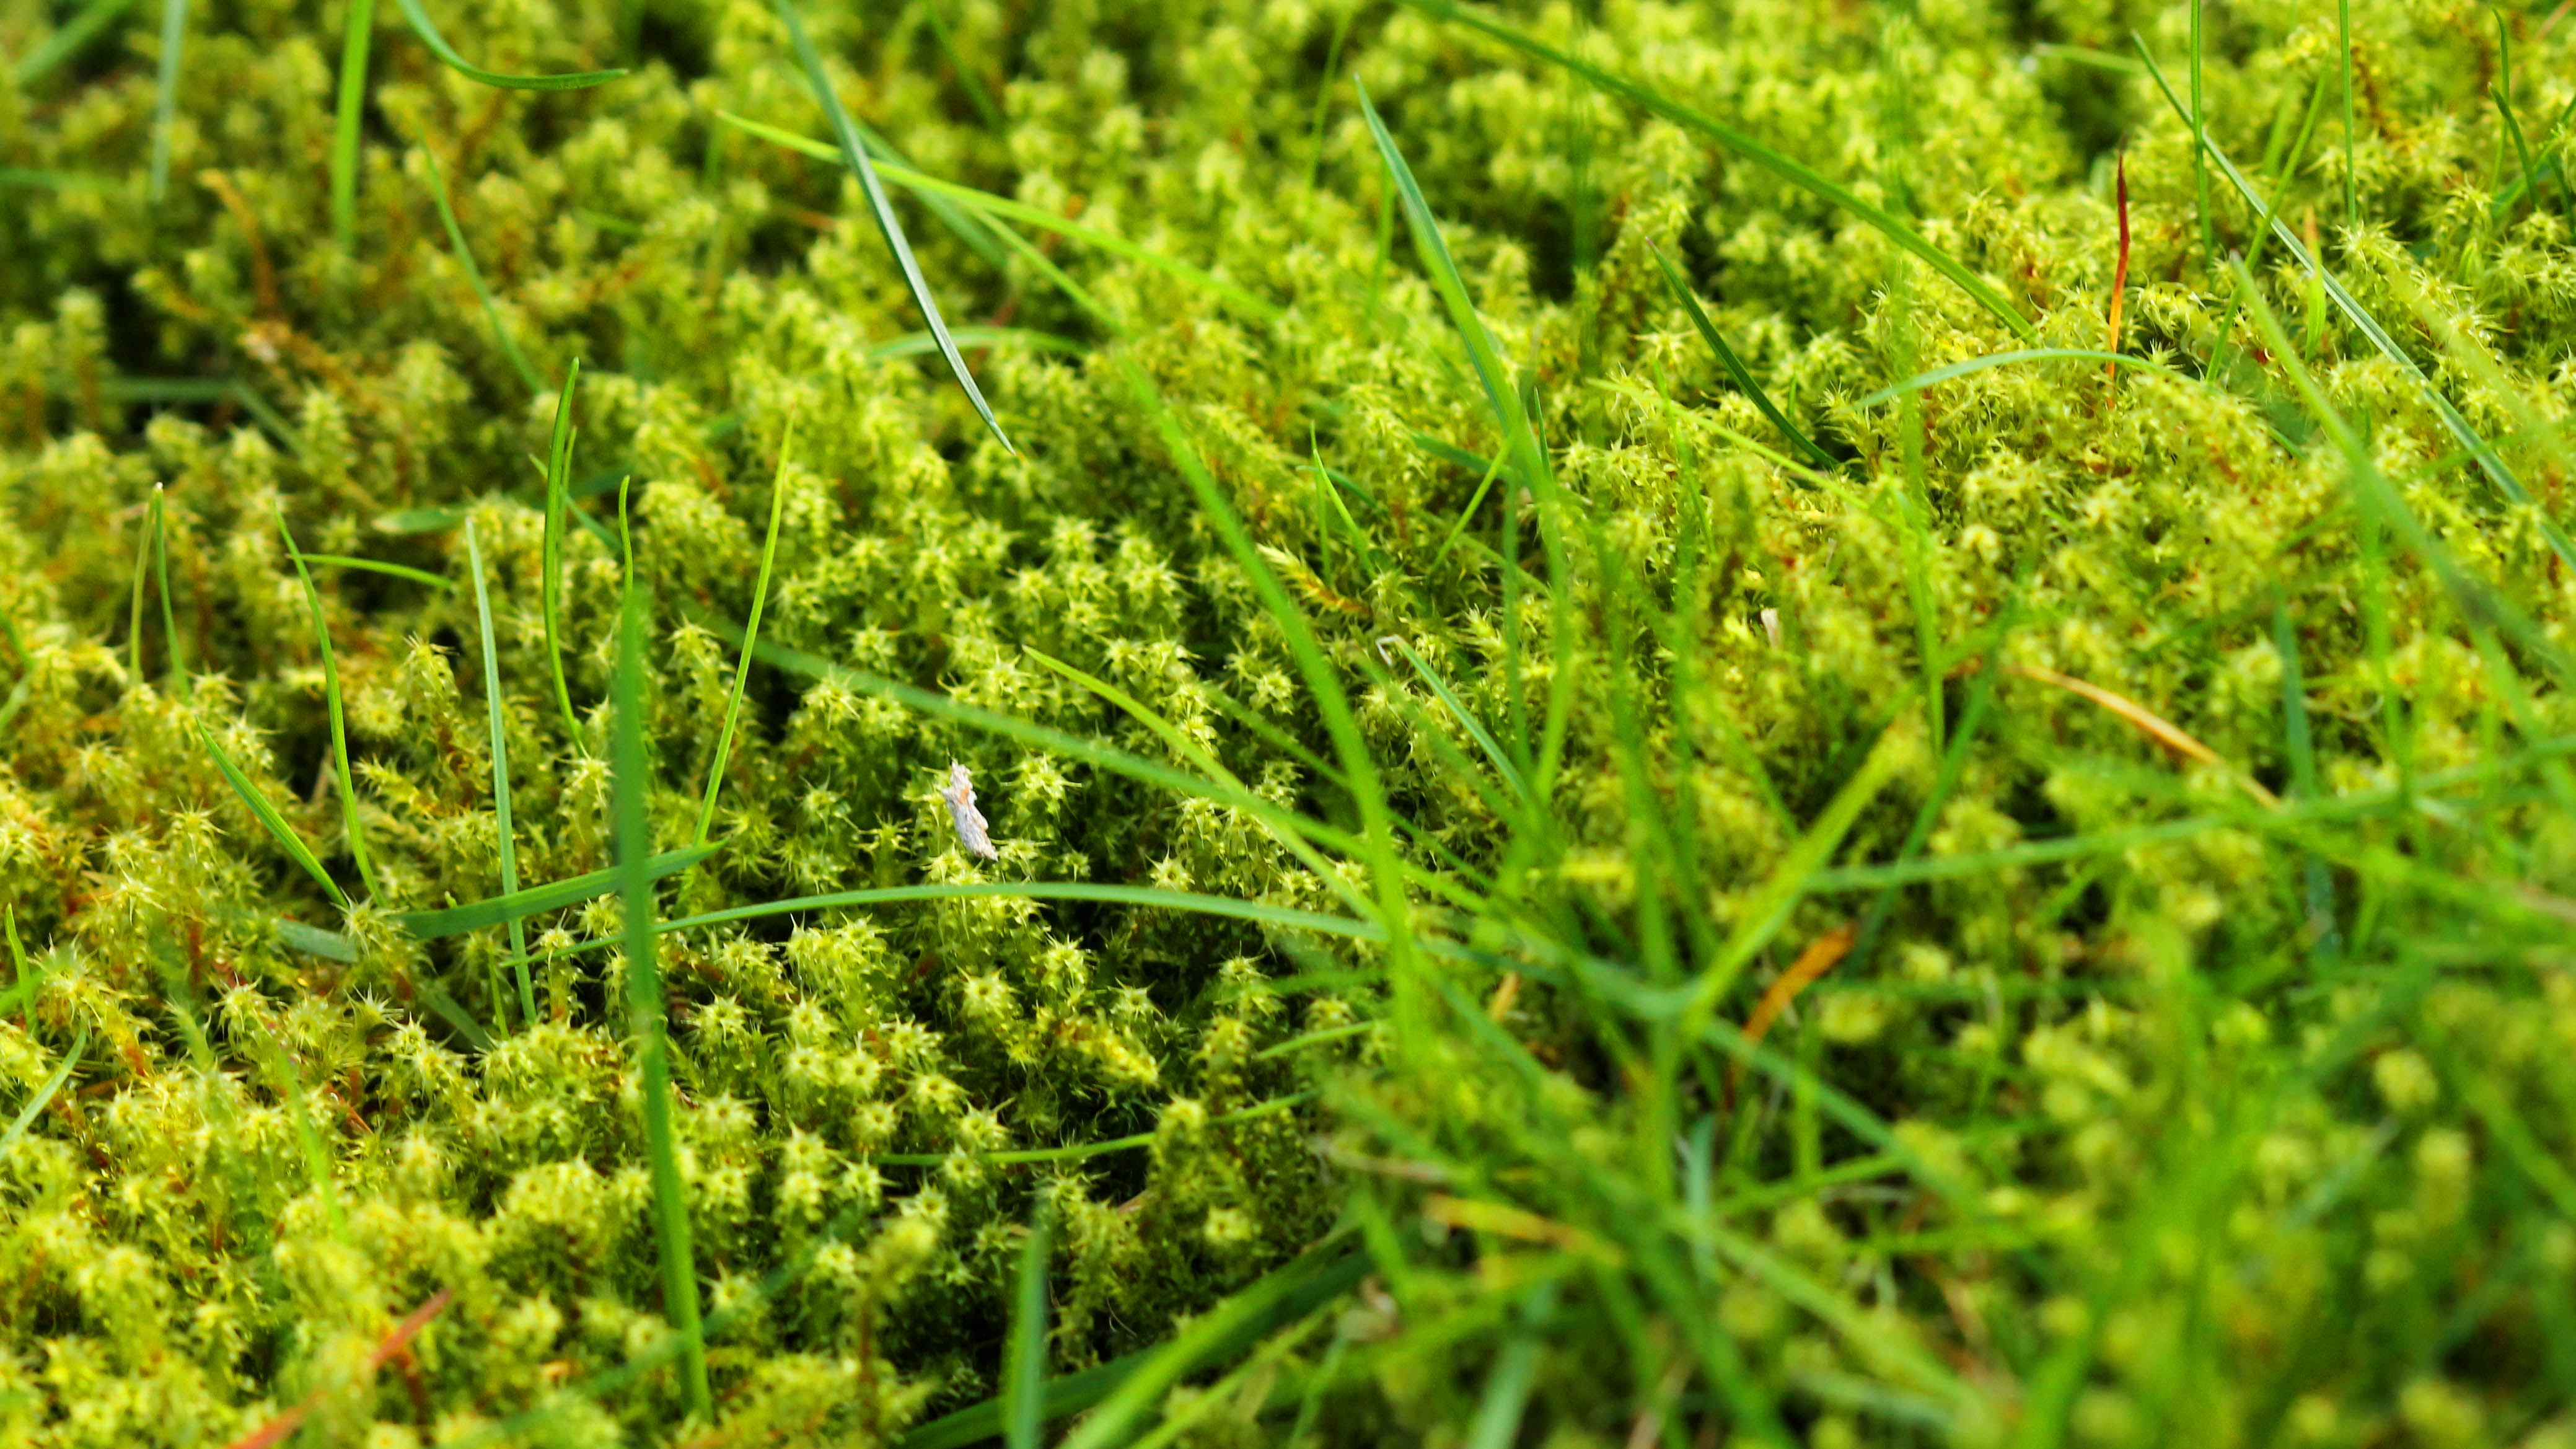 5 ways to get rid of moss in your lawn and keep it green | Tom's Guide